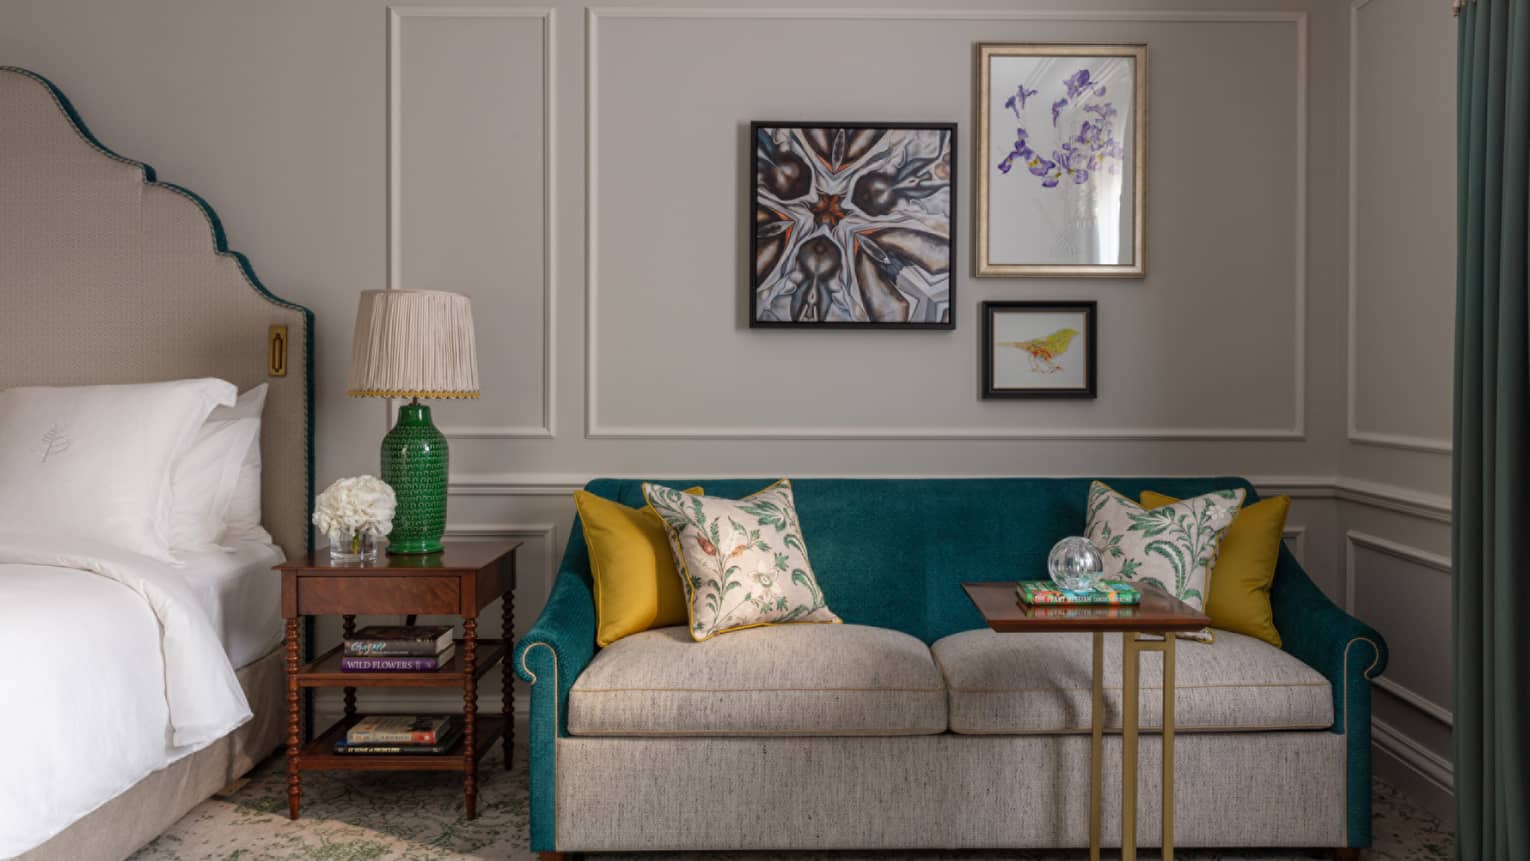 Cream and turquoise loveseat with mustard-coloured pillows, bedside table with green lamp, trio of wall art